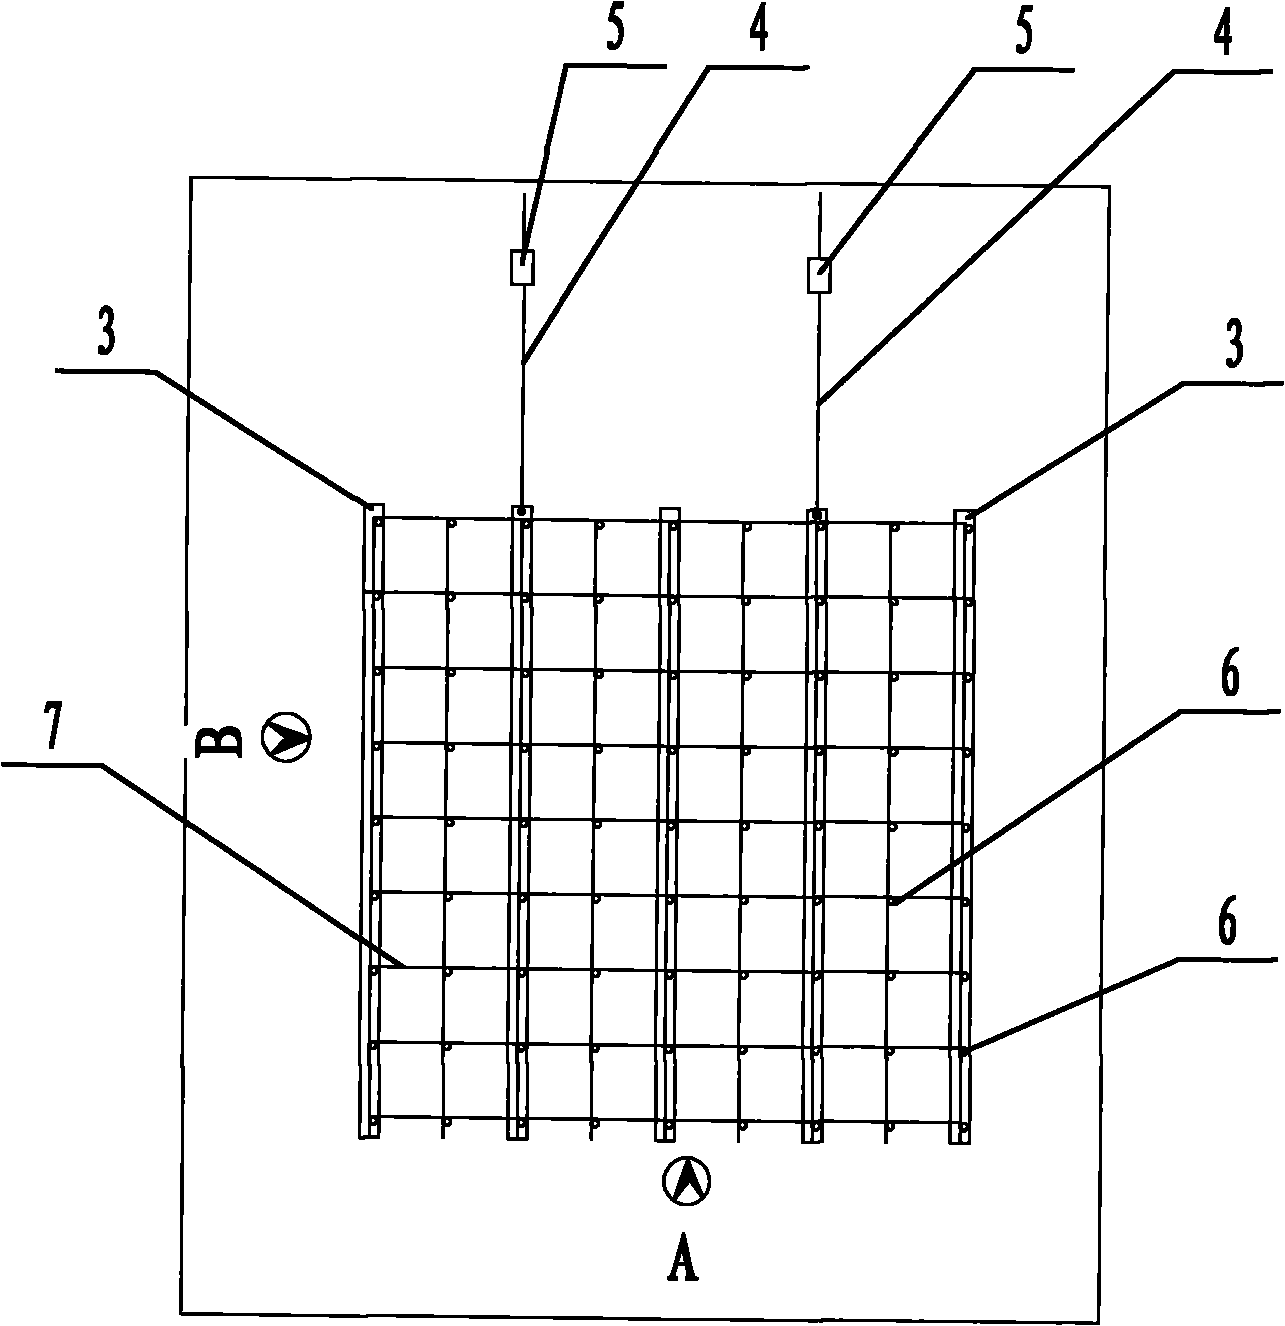 Building method of integral slip type scaffold used for steel grid construction